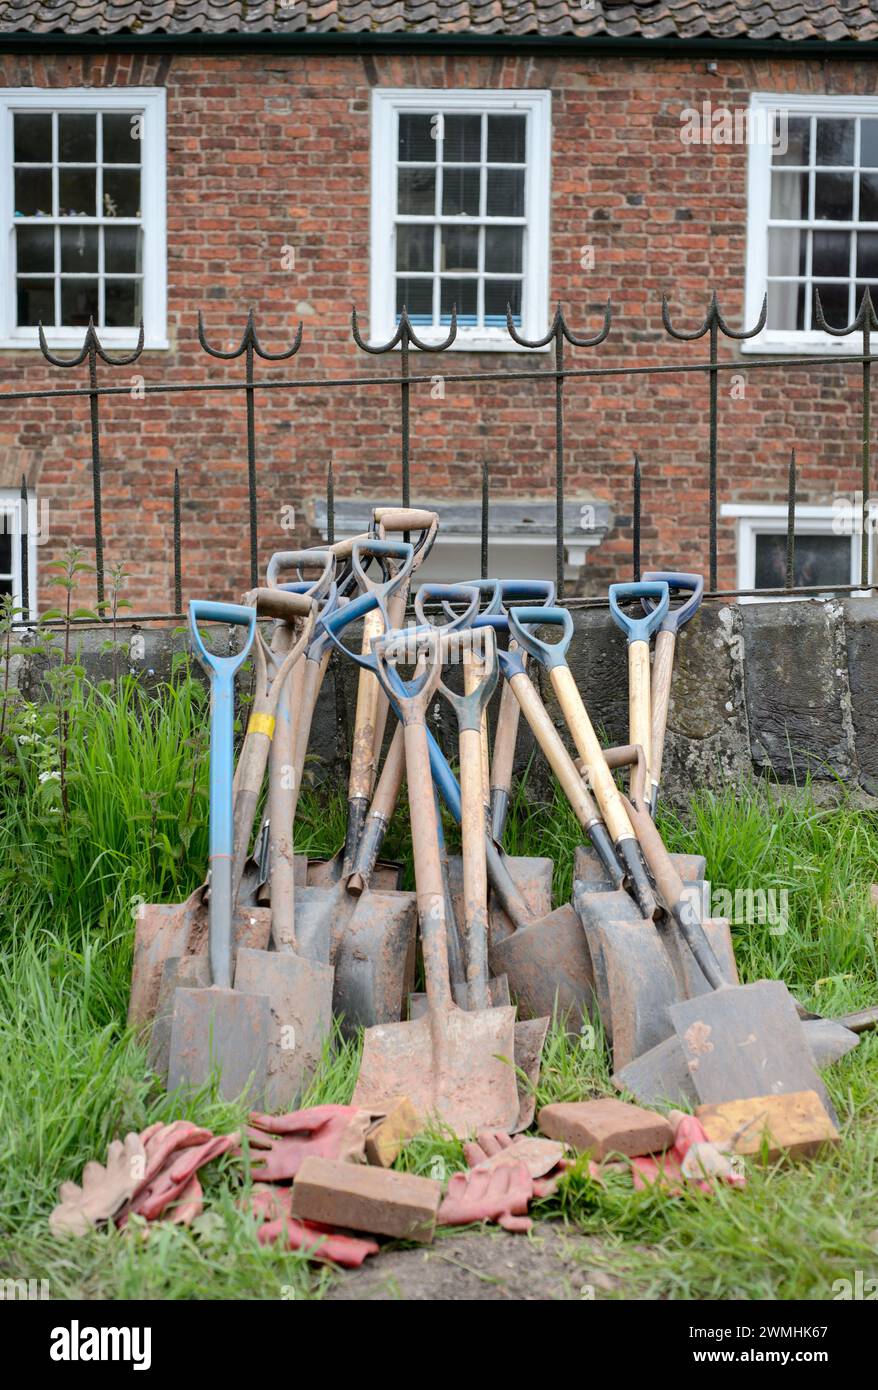 Spades and shovels at an archaeological dig, UK Stock Photo